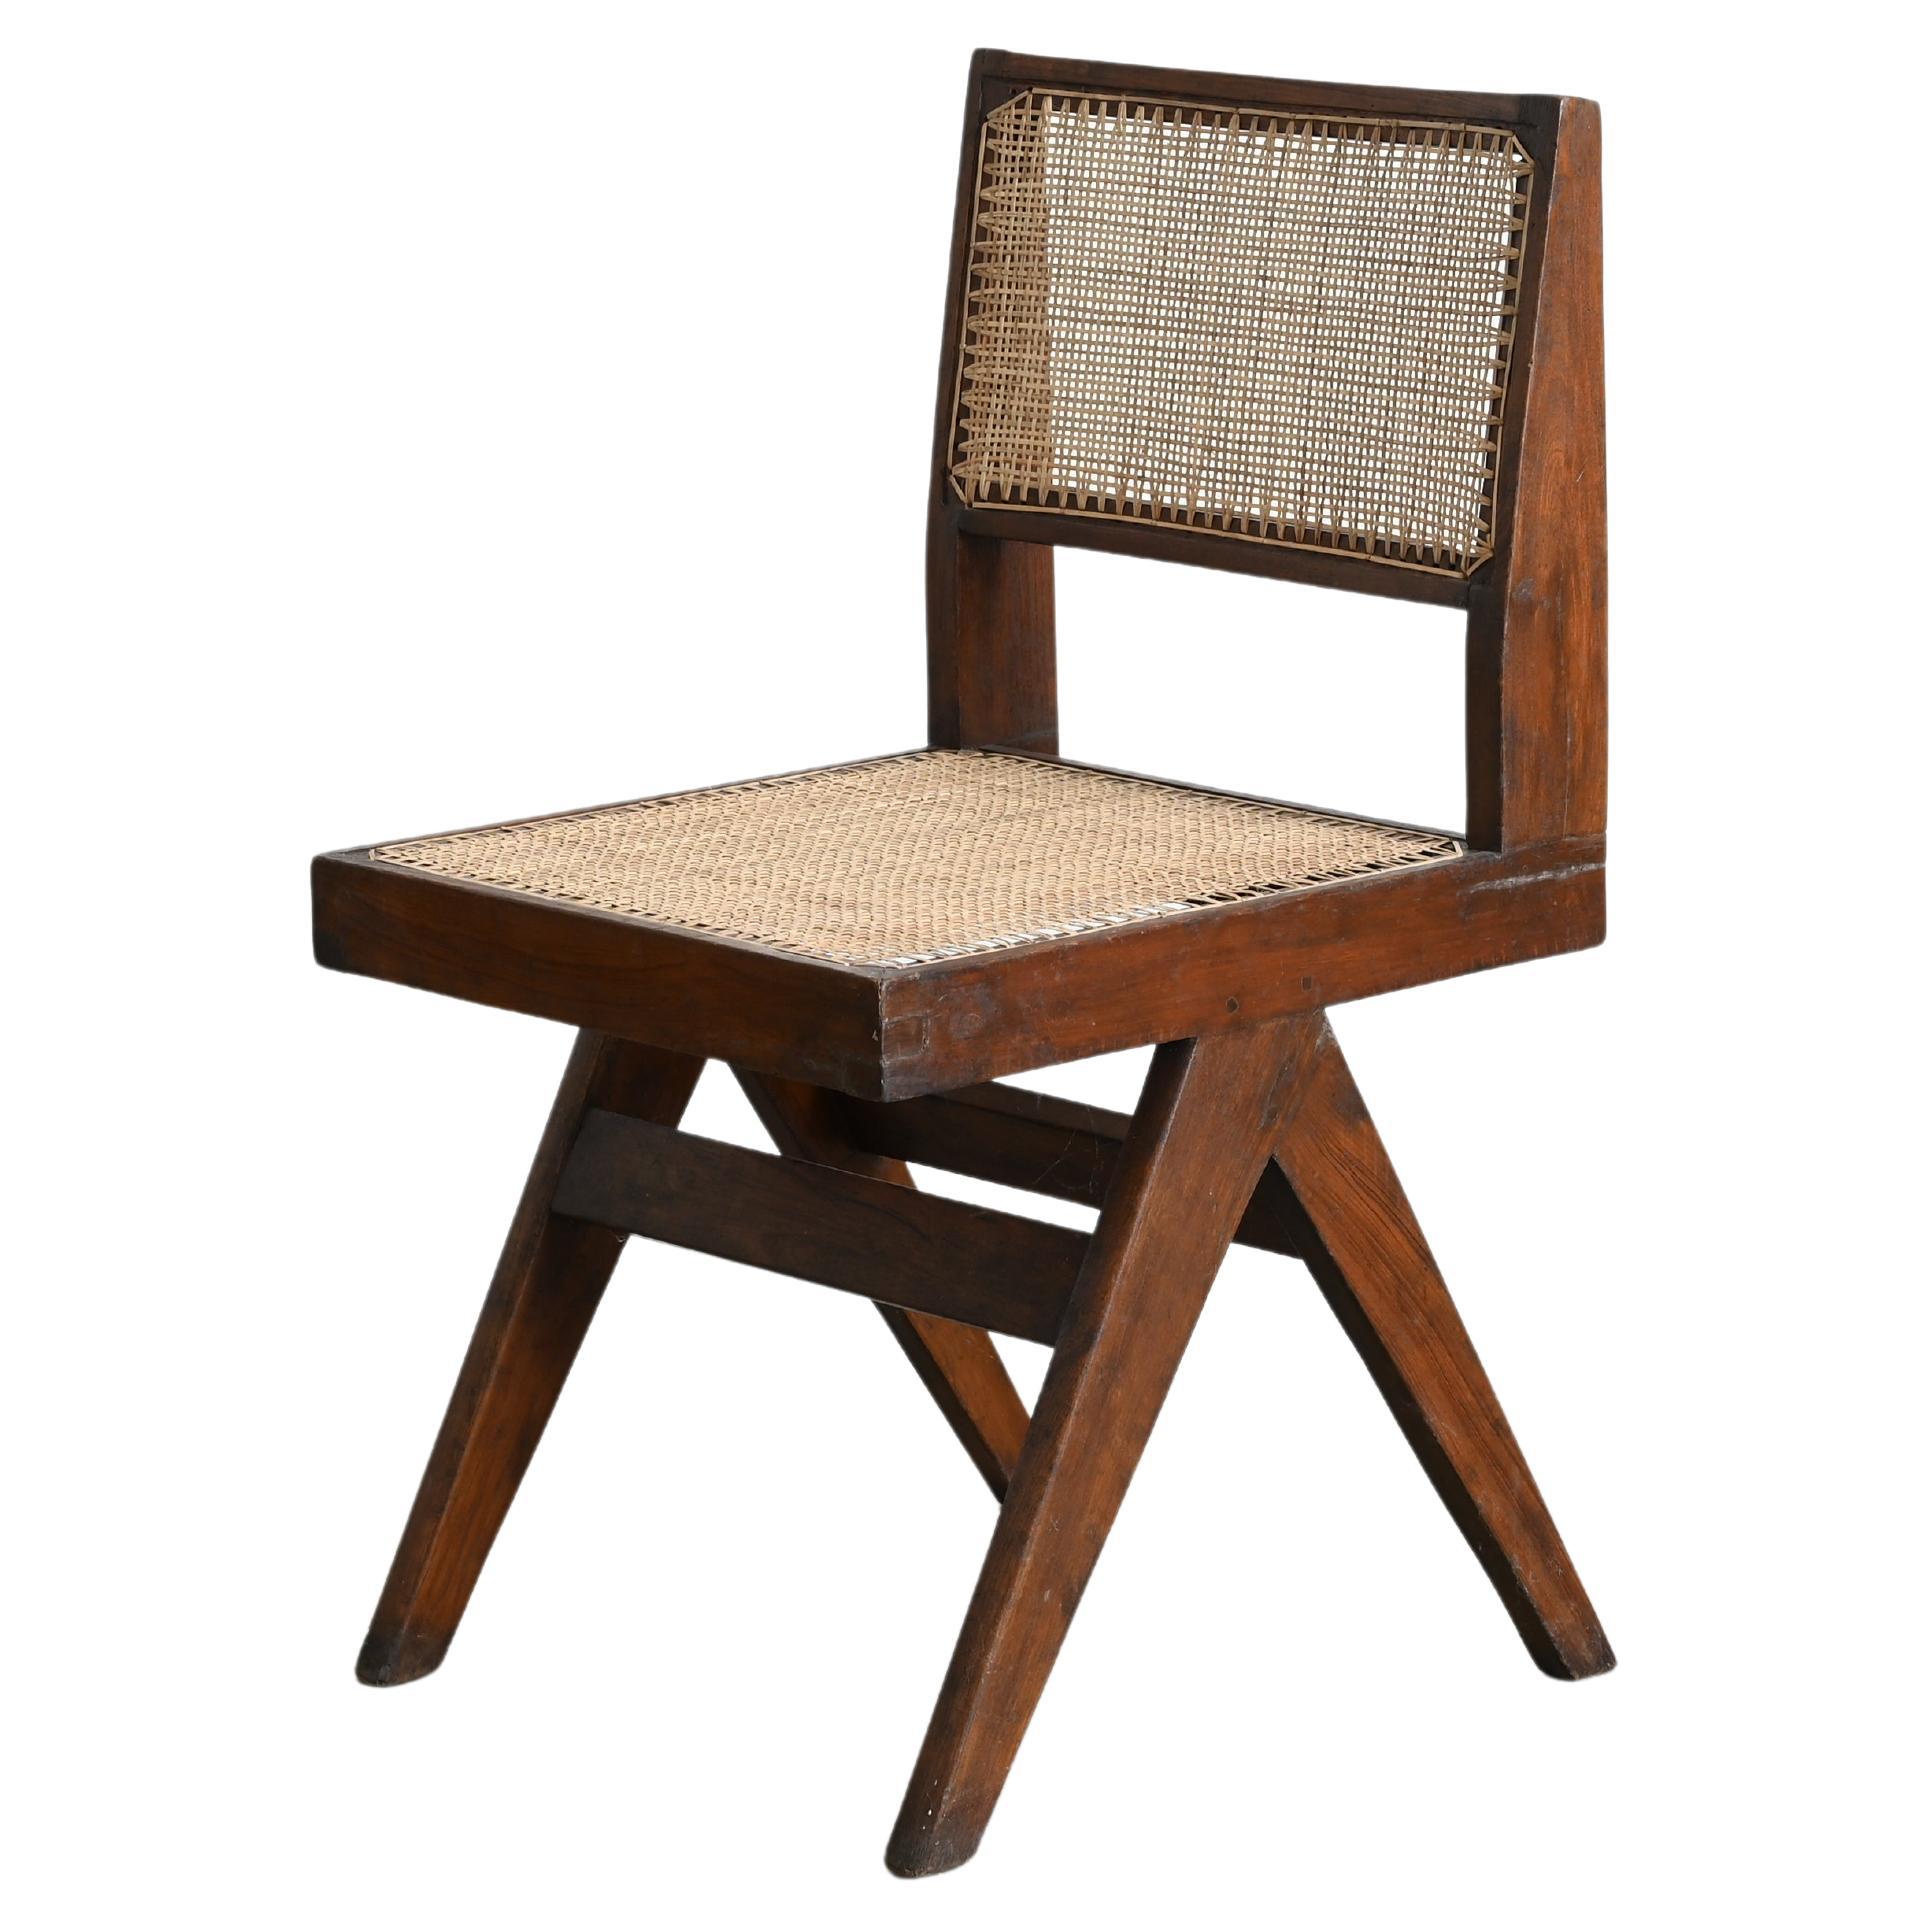 Pierre Jeanneret Pj-SI-25-A Chair / Authentic Mid-Century Modern Chandigarh